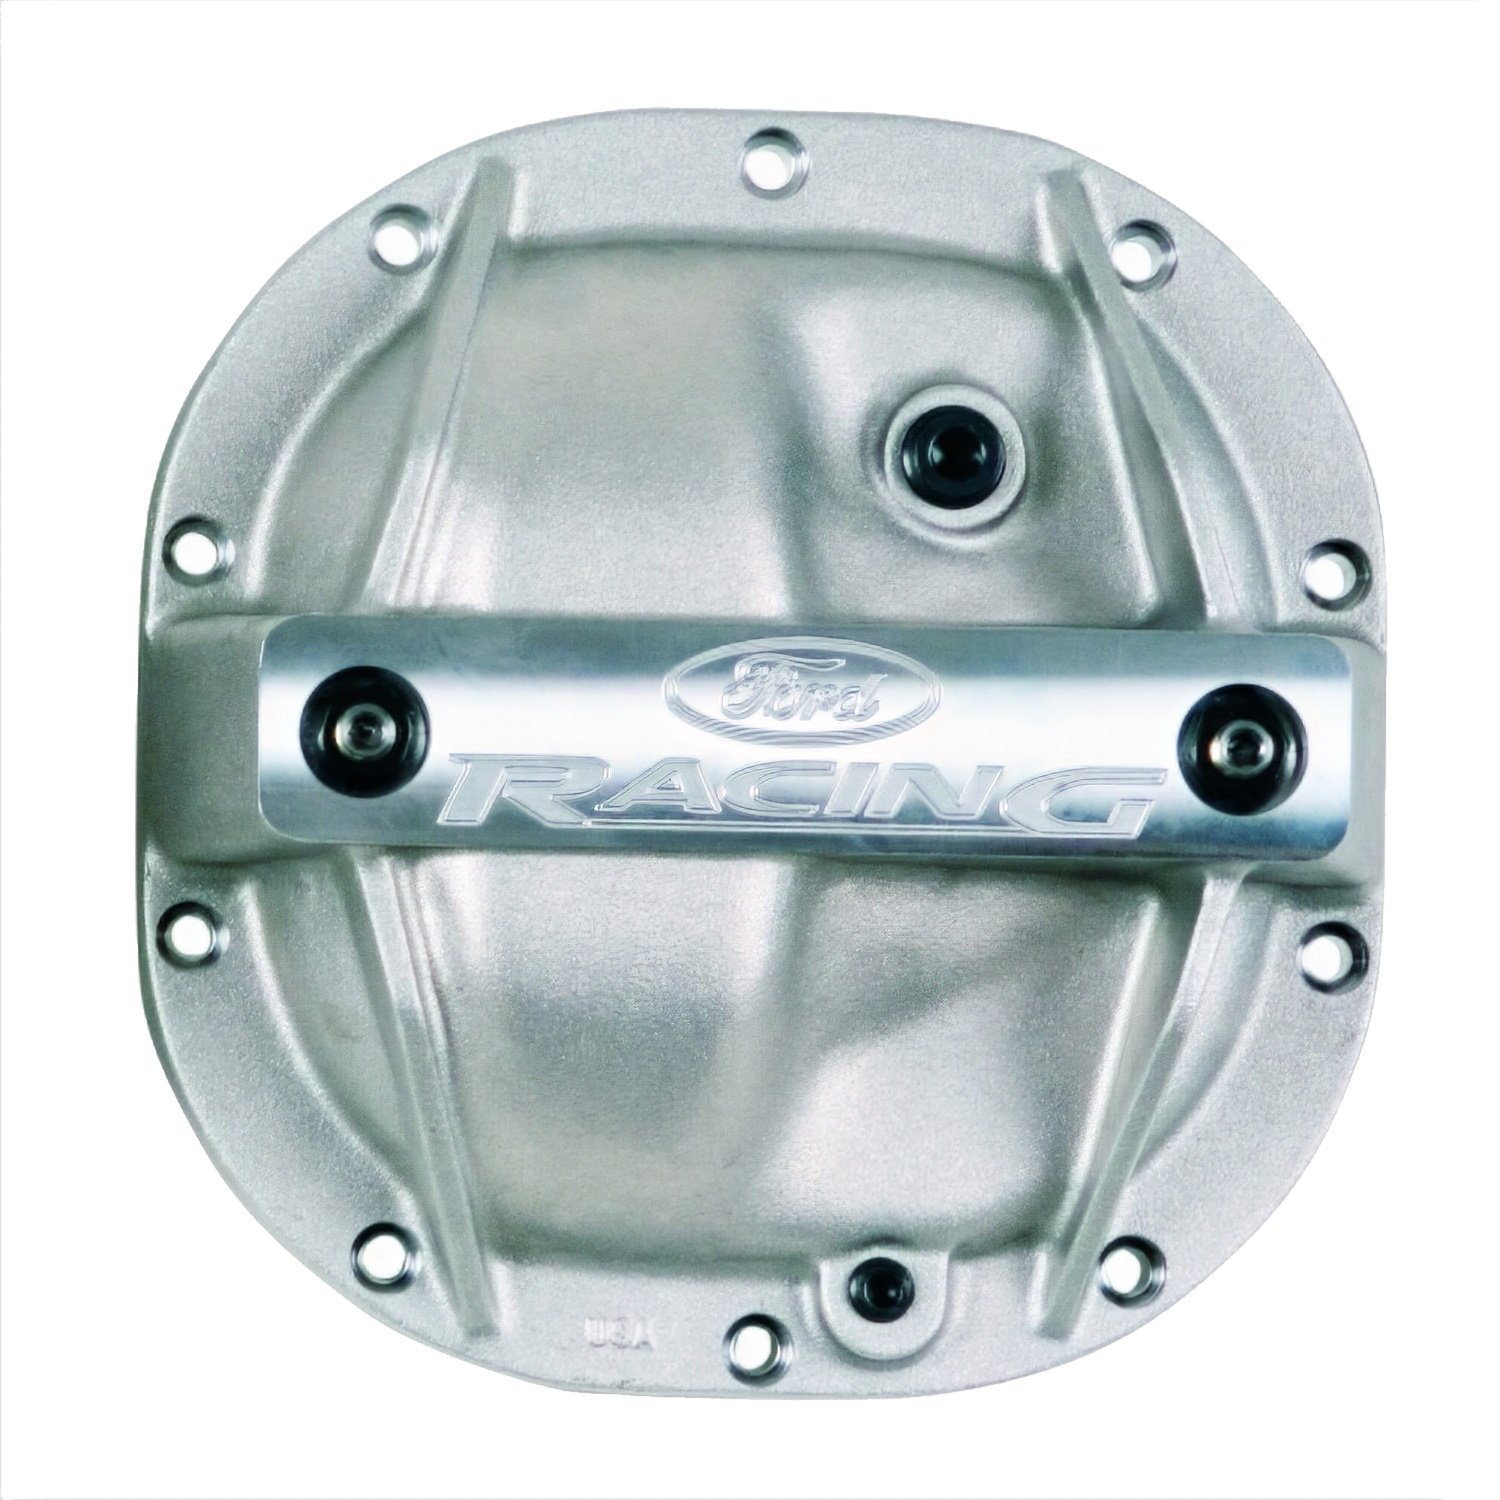 8.8" Axle Girdle Cover Kit Non-IRS Applications